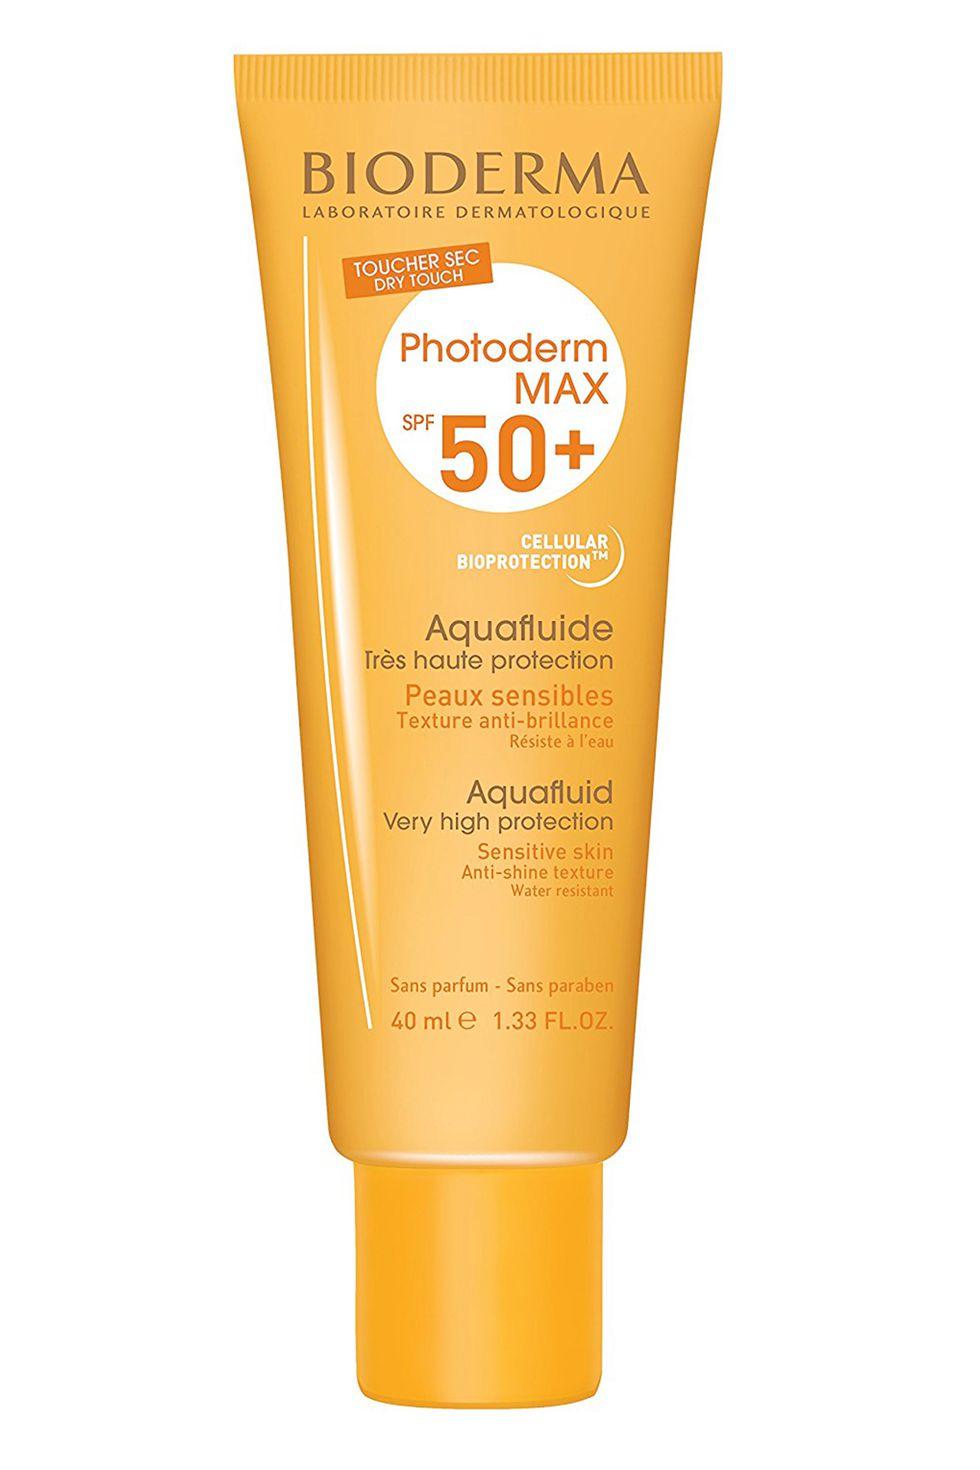 which spf is best for face